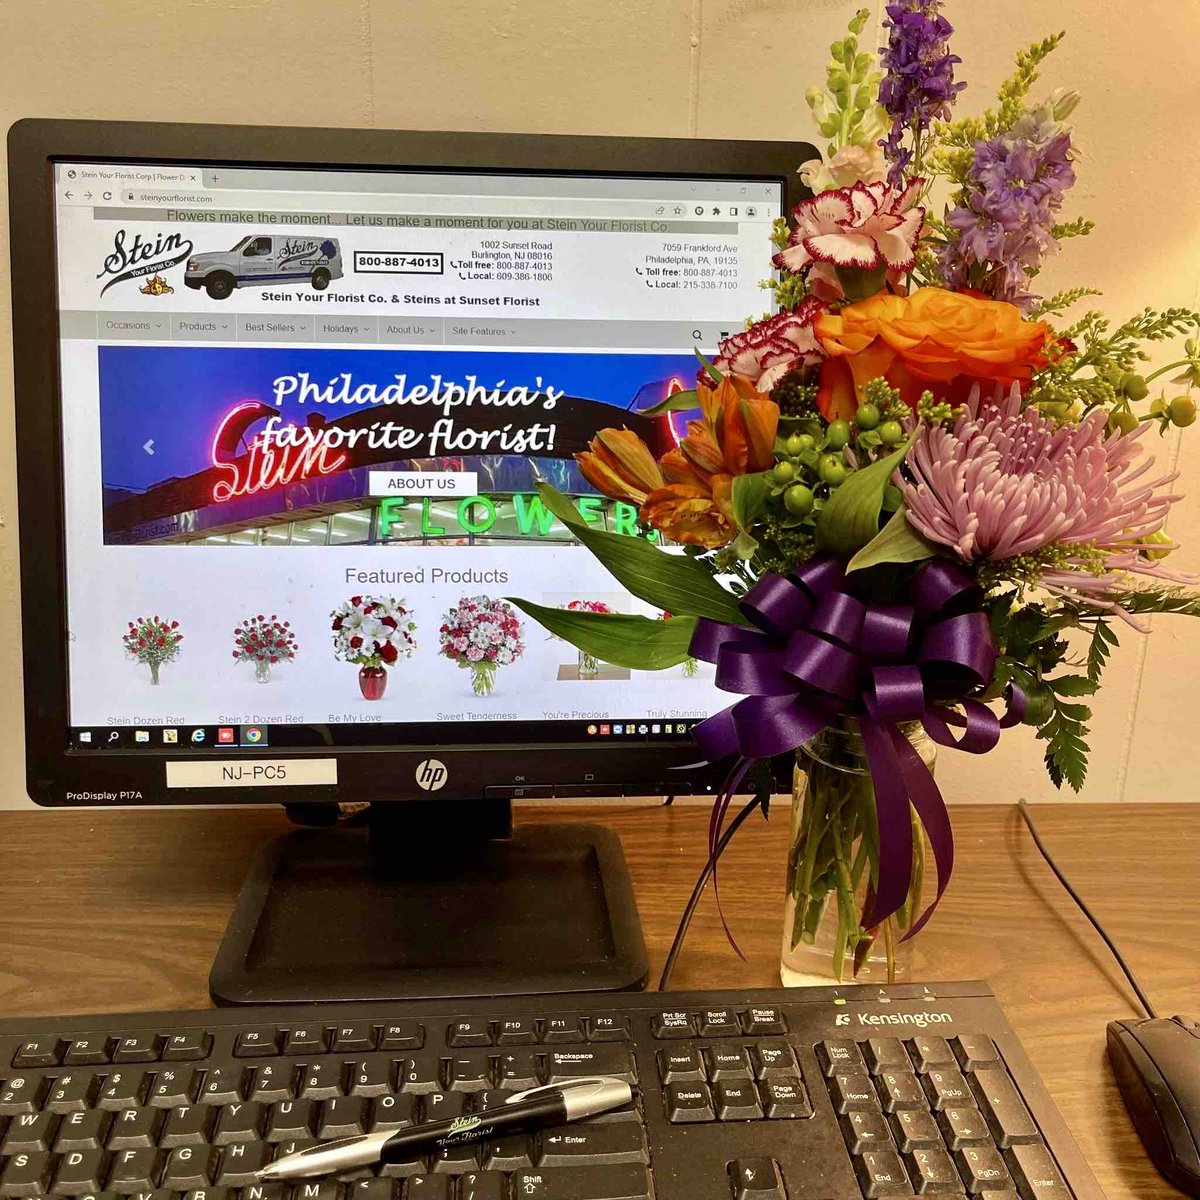 Always nice to work with your buds. 💐 . . #steinflorist #steinyourflorist #flowers #florist #flowershop #floristry #shopsmall #shoplocal #smallbusiness #phillyflorist #philadelphiaflorist #NJflorist #flowersatwork